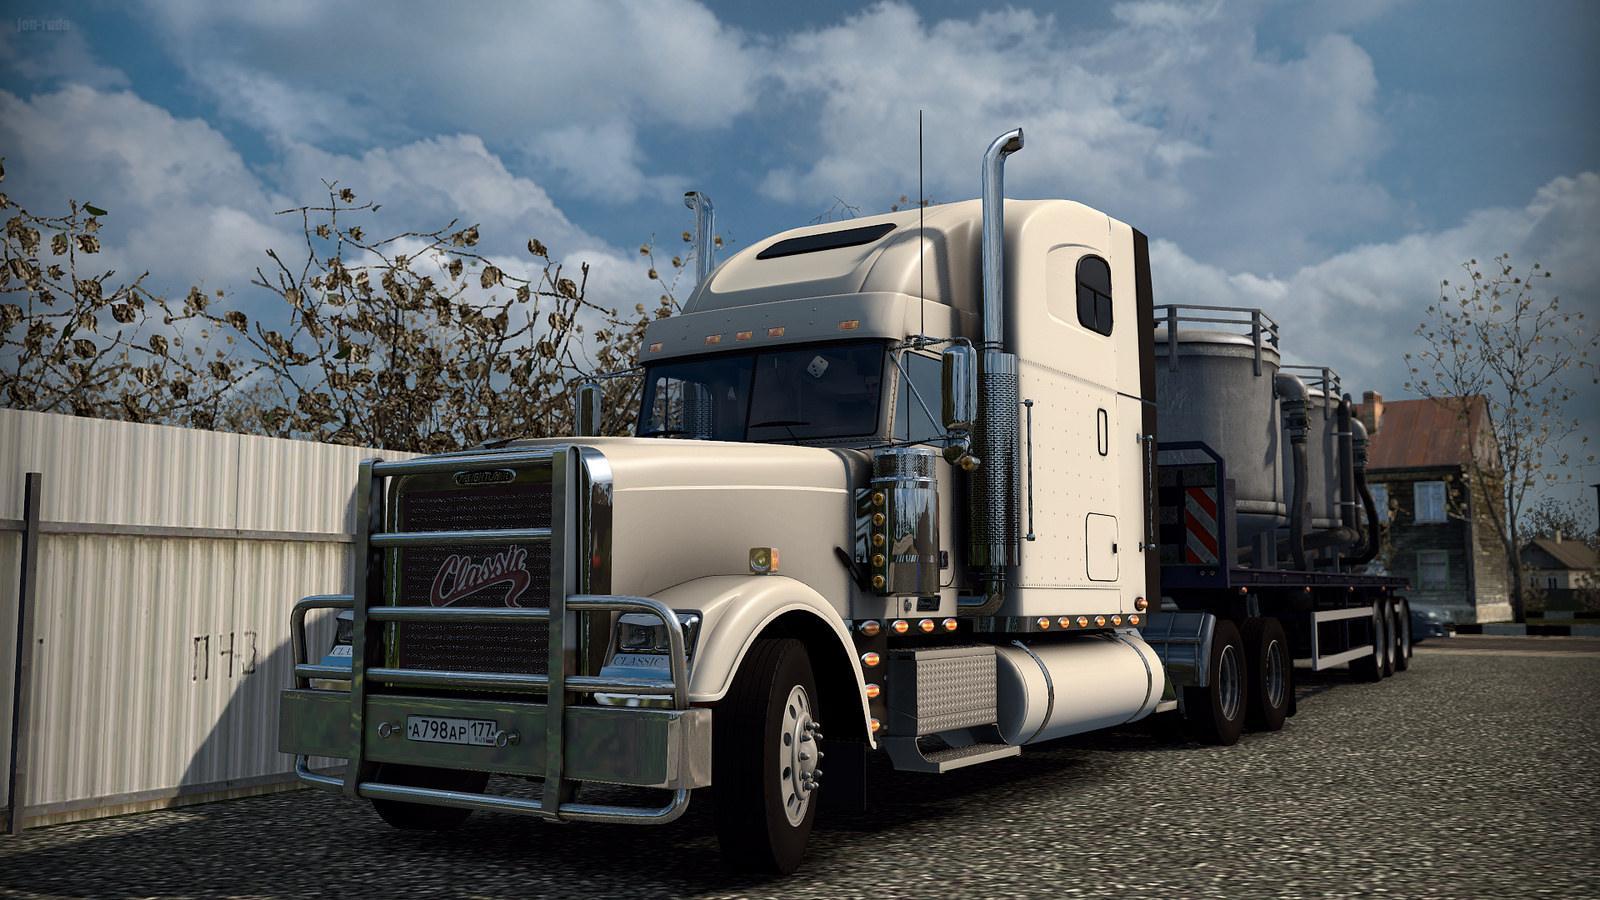 FREIGHTLINER CLASSIC XL V3.2.0 1.22. ETS2 mods. Euro truck